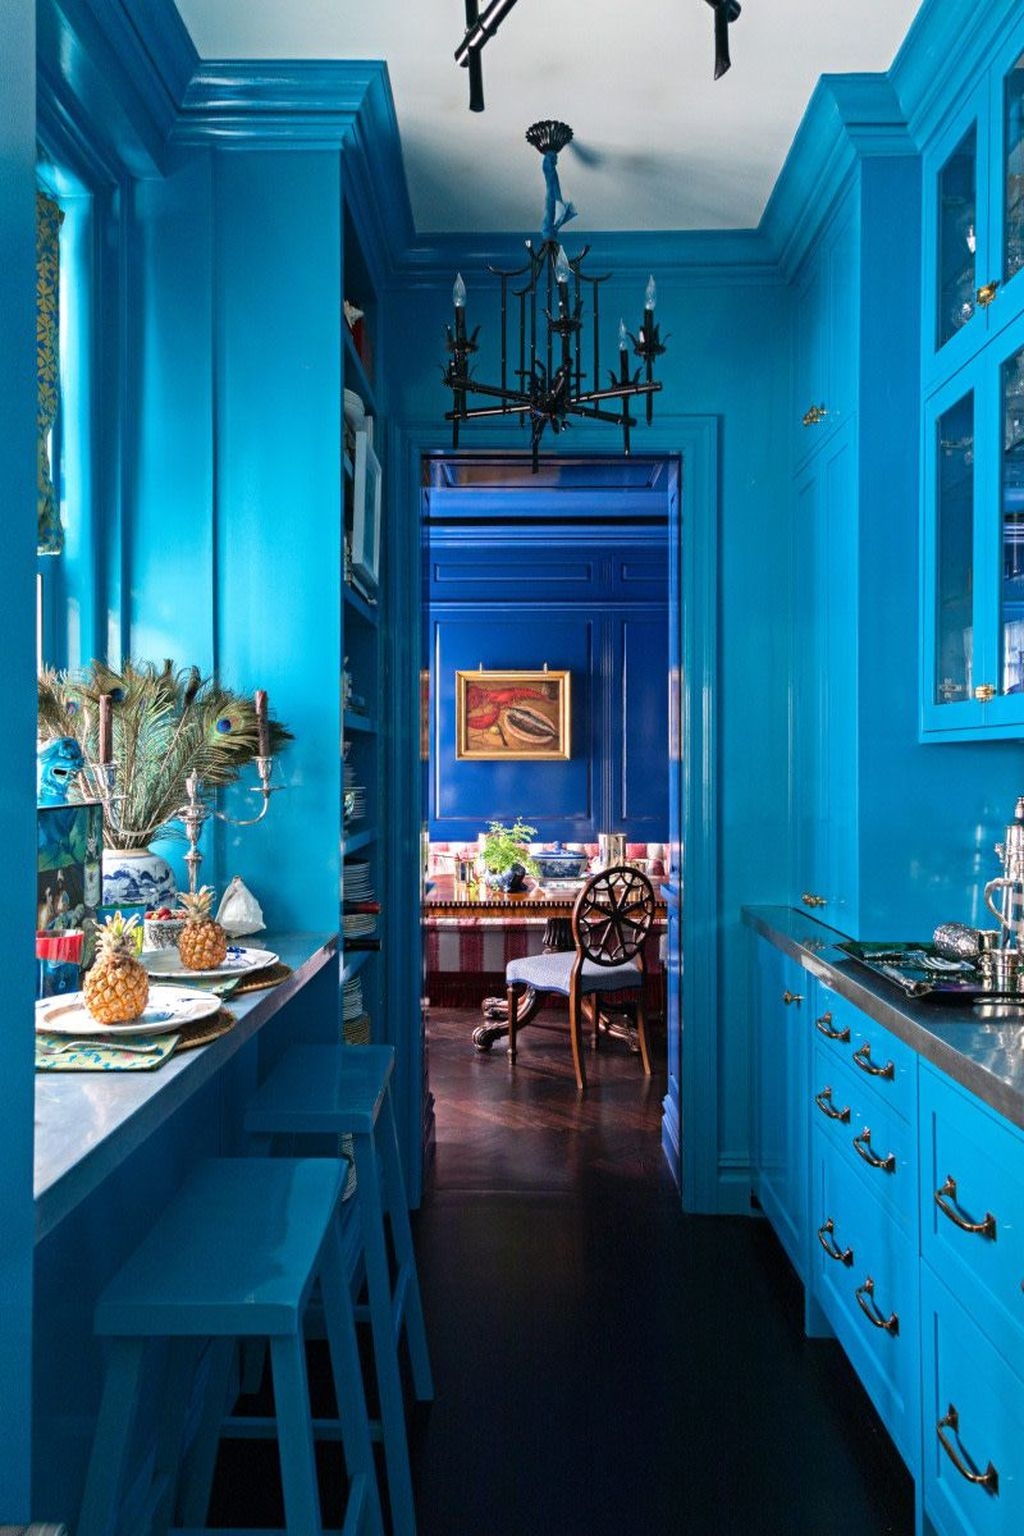 Best Ideas To Bring A Pop Of Bright Color Into Your Interior Design 10